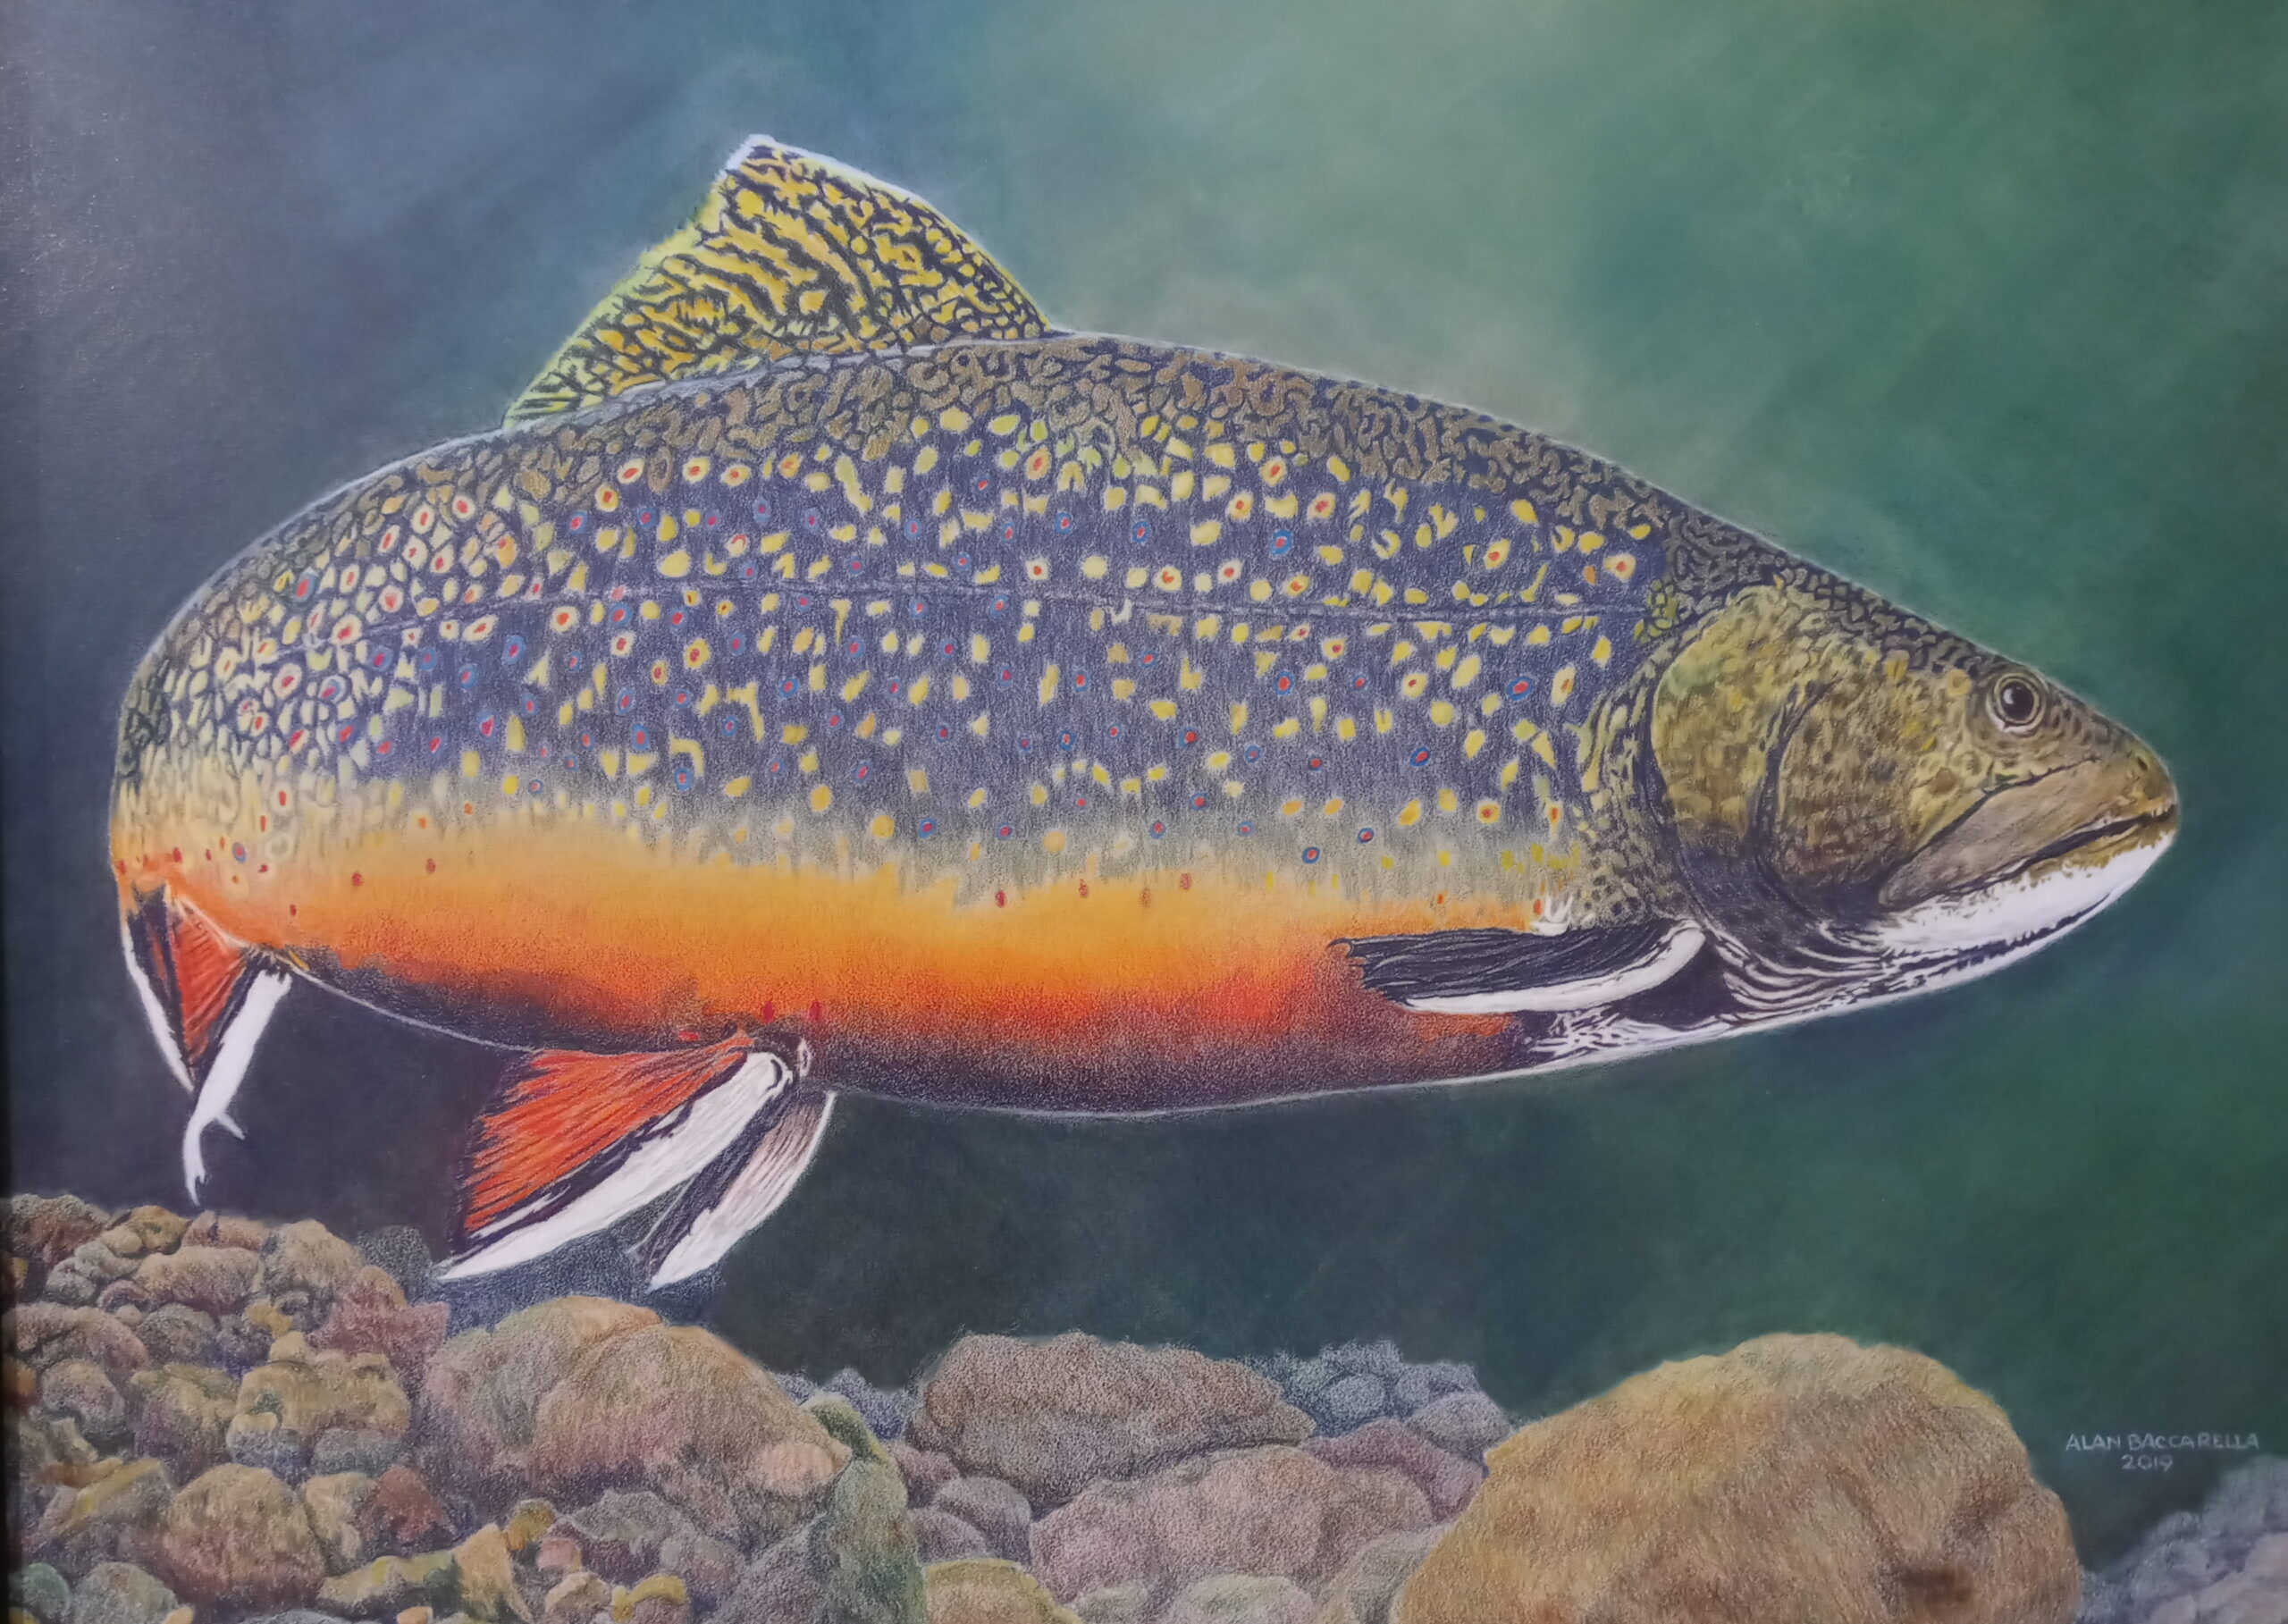 Rainbow trout art by Alan Baccarella